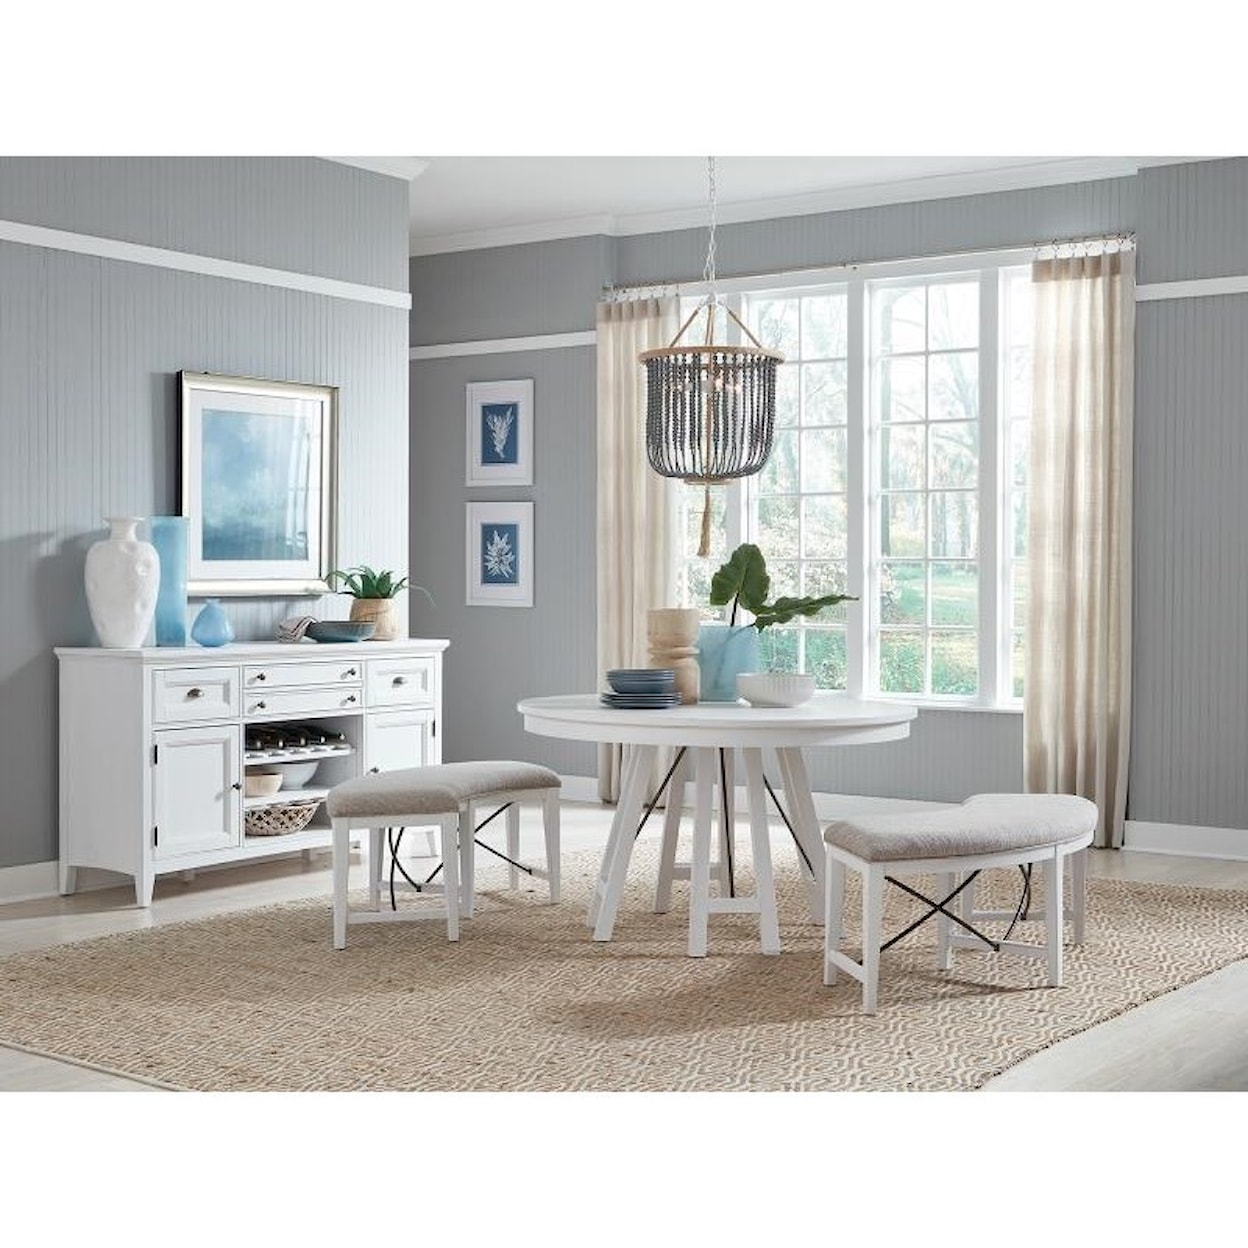 Magnussen Home Heron Cove Dining Casual Dining Room Group